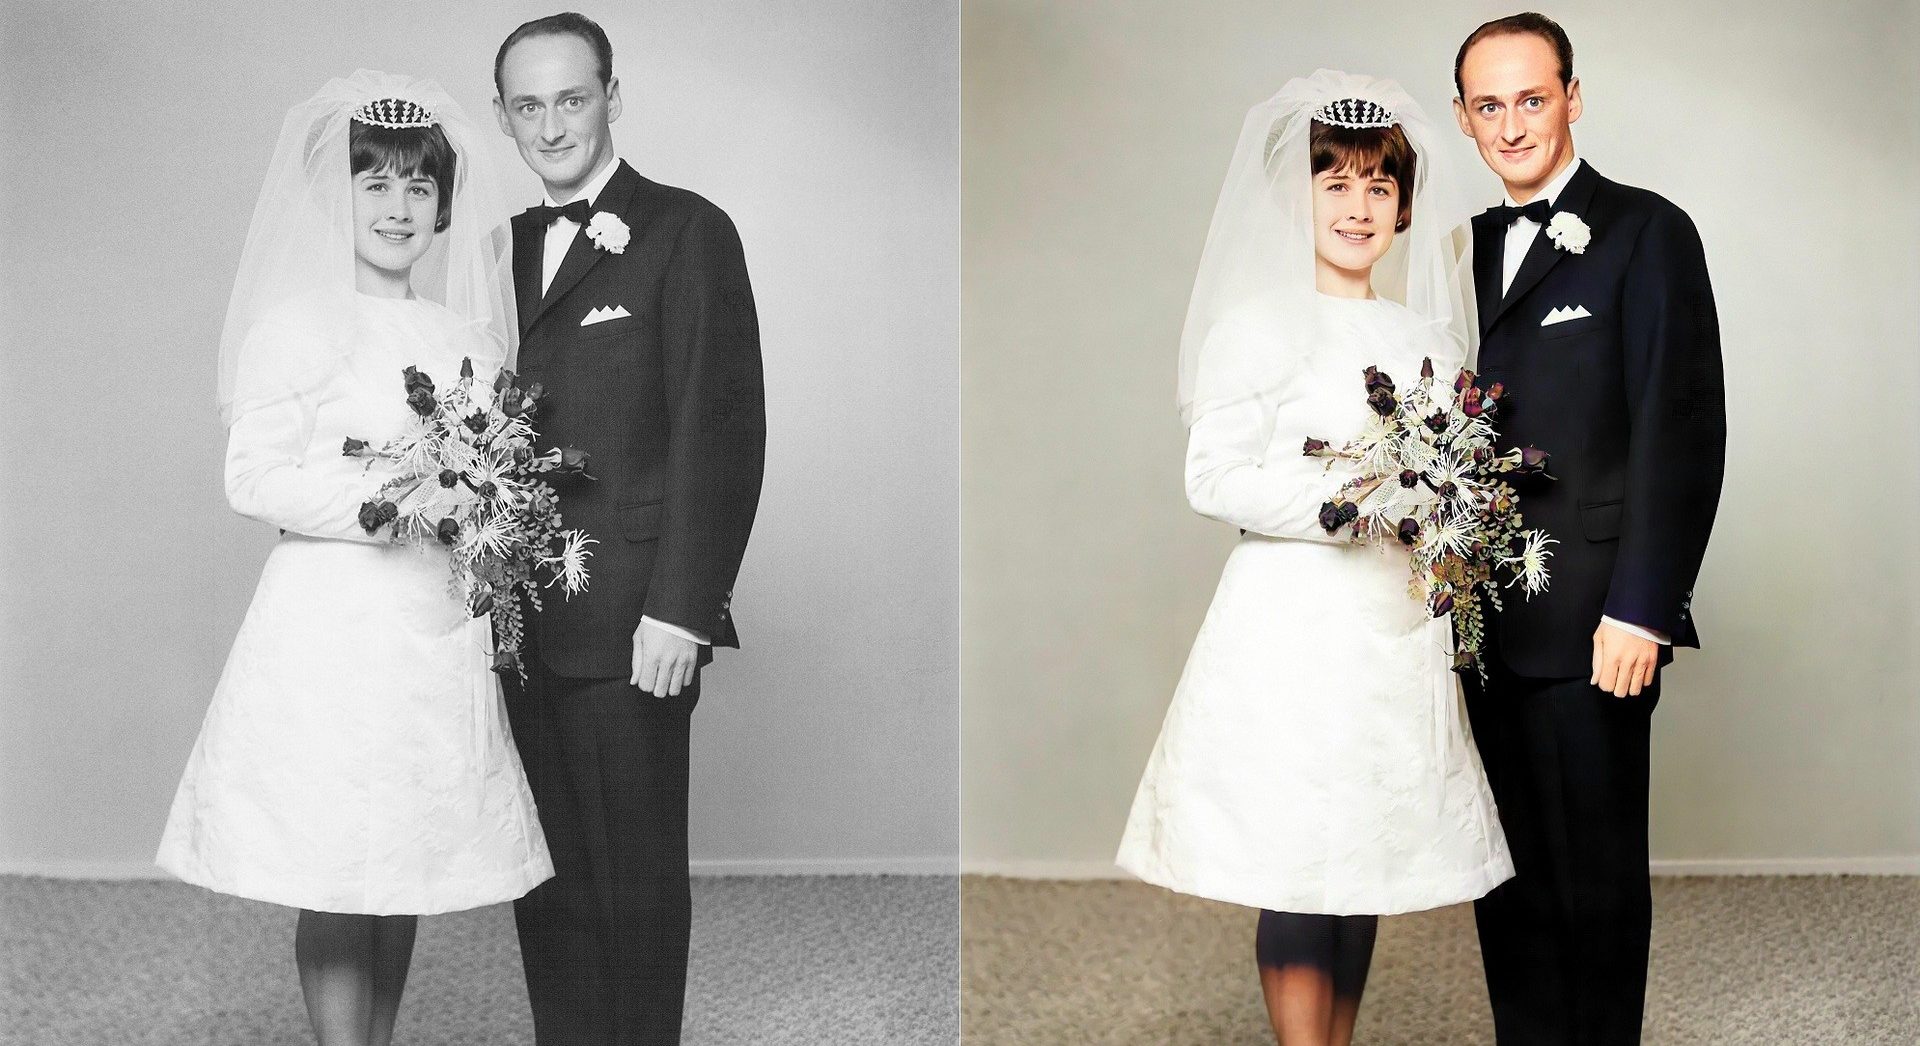 #LoveInFullColor: Share Your Enhanced & Colorized Wedding Photos for a Chance to Win!